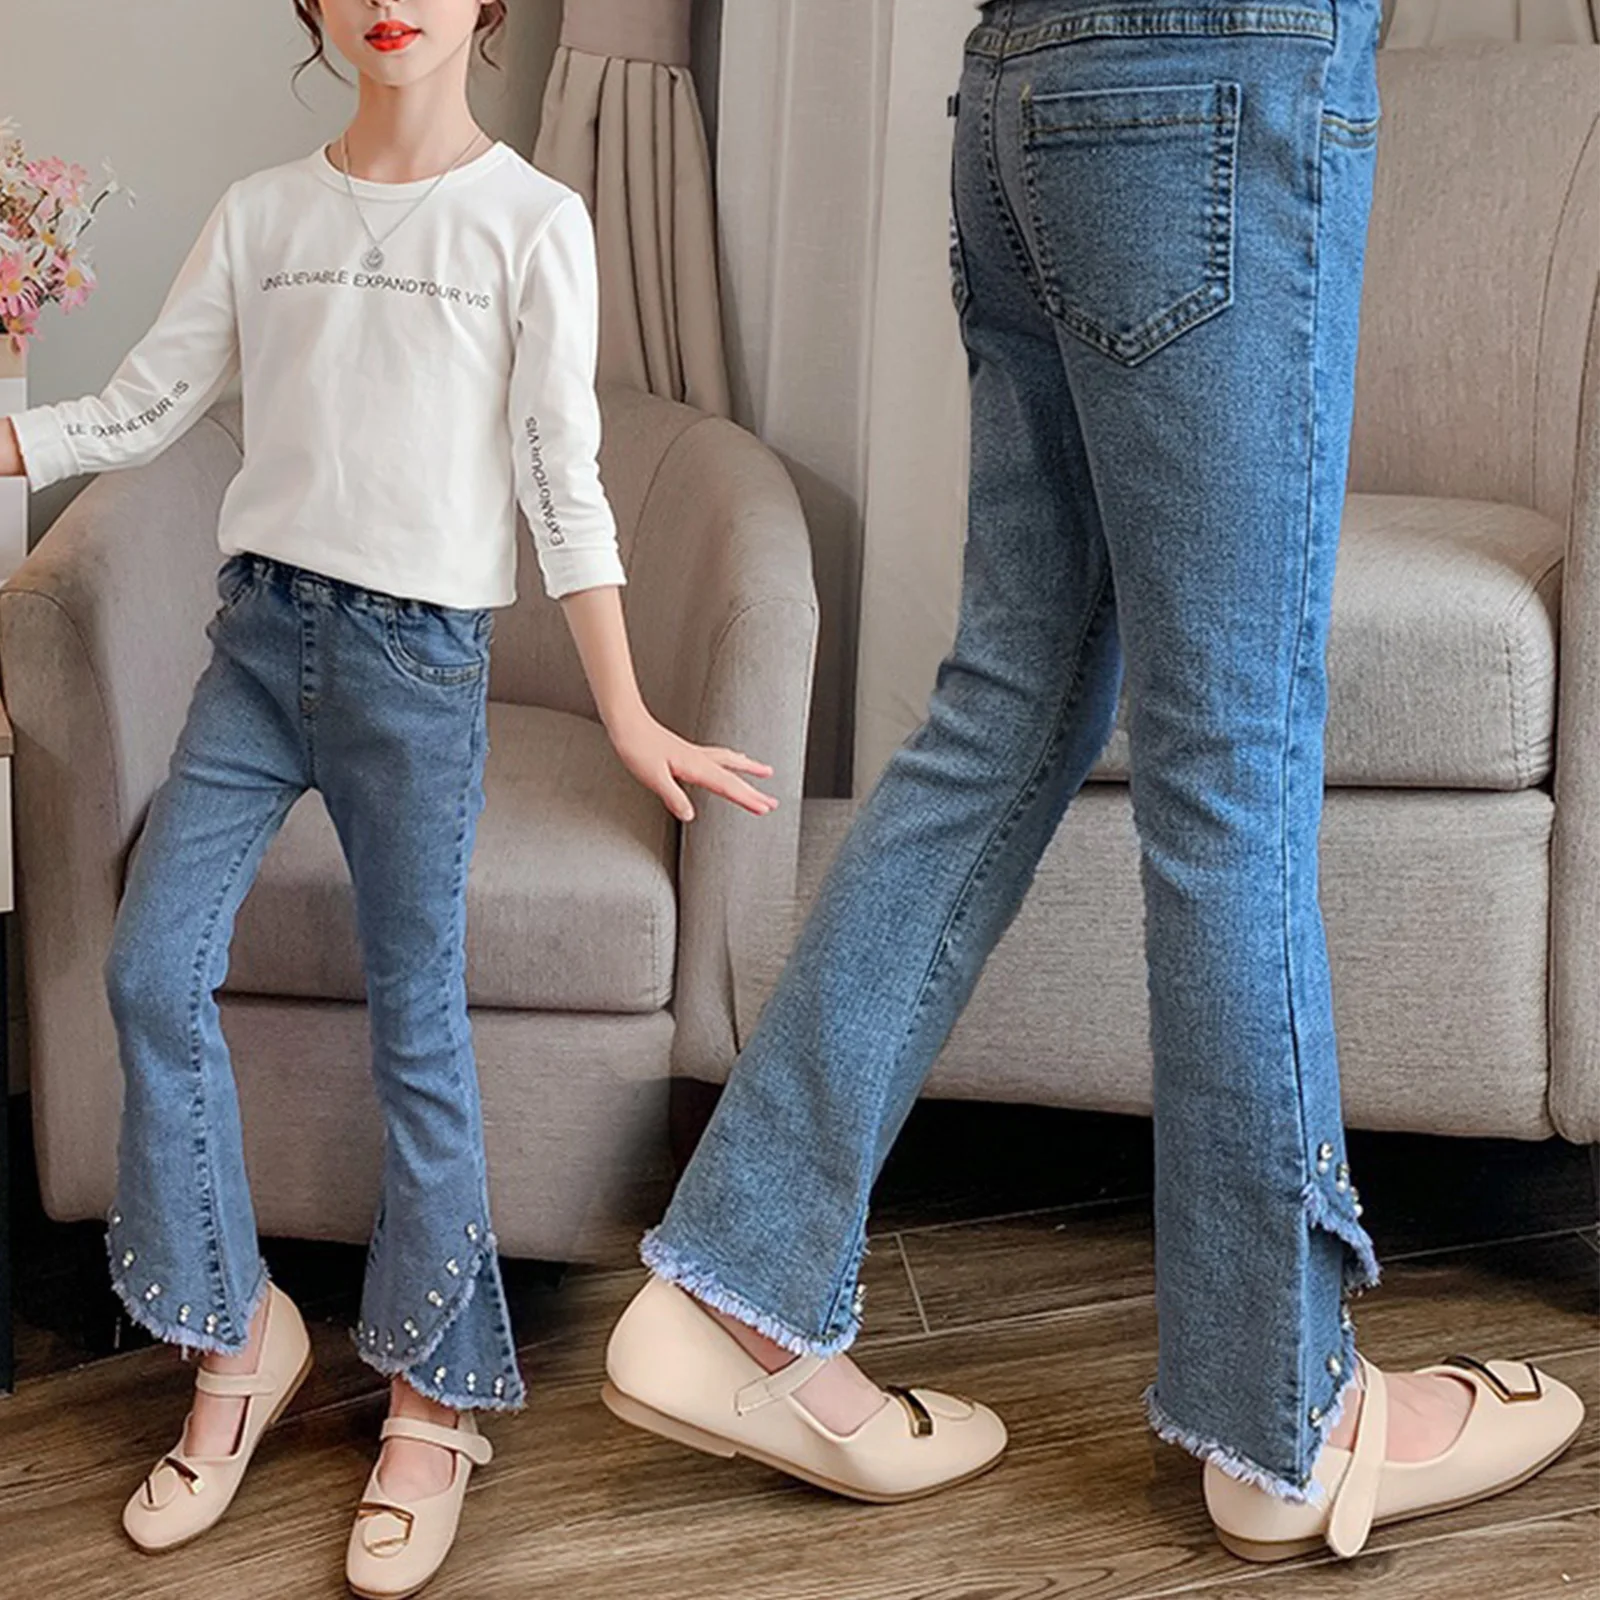 

Teen Student Girls Flared Jeans Autumn Kids Denim Pants Casual Jeans for Girls Pants 6 8 10 12 14 Years Faux Pearls Trousers